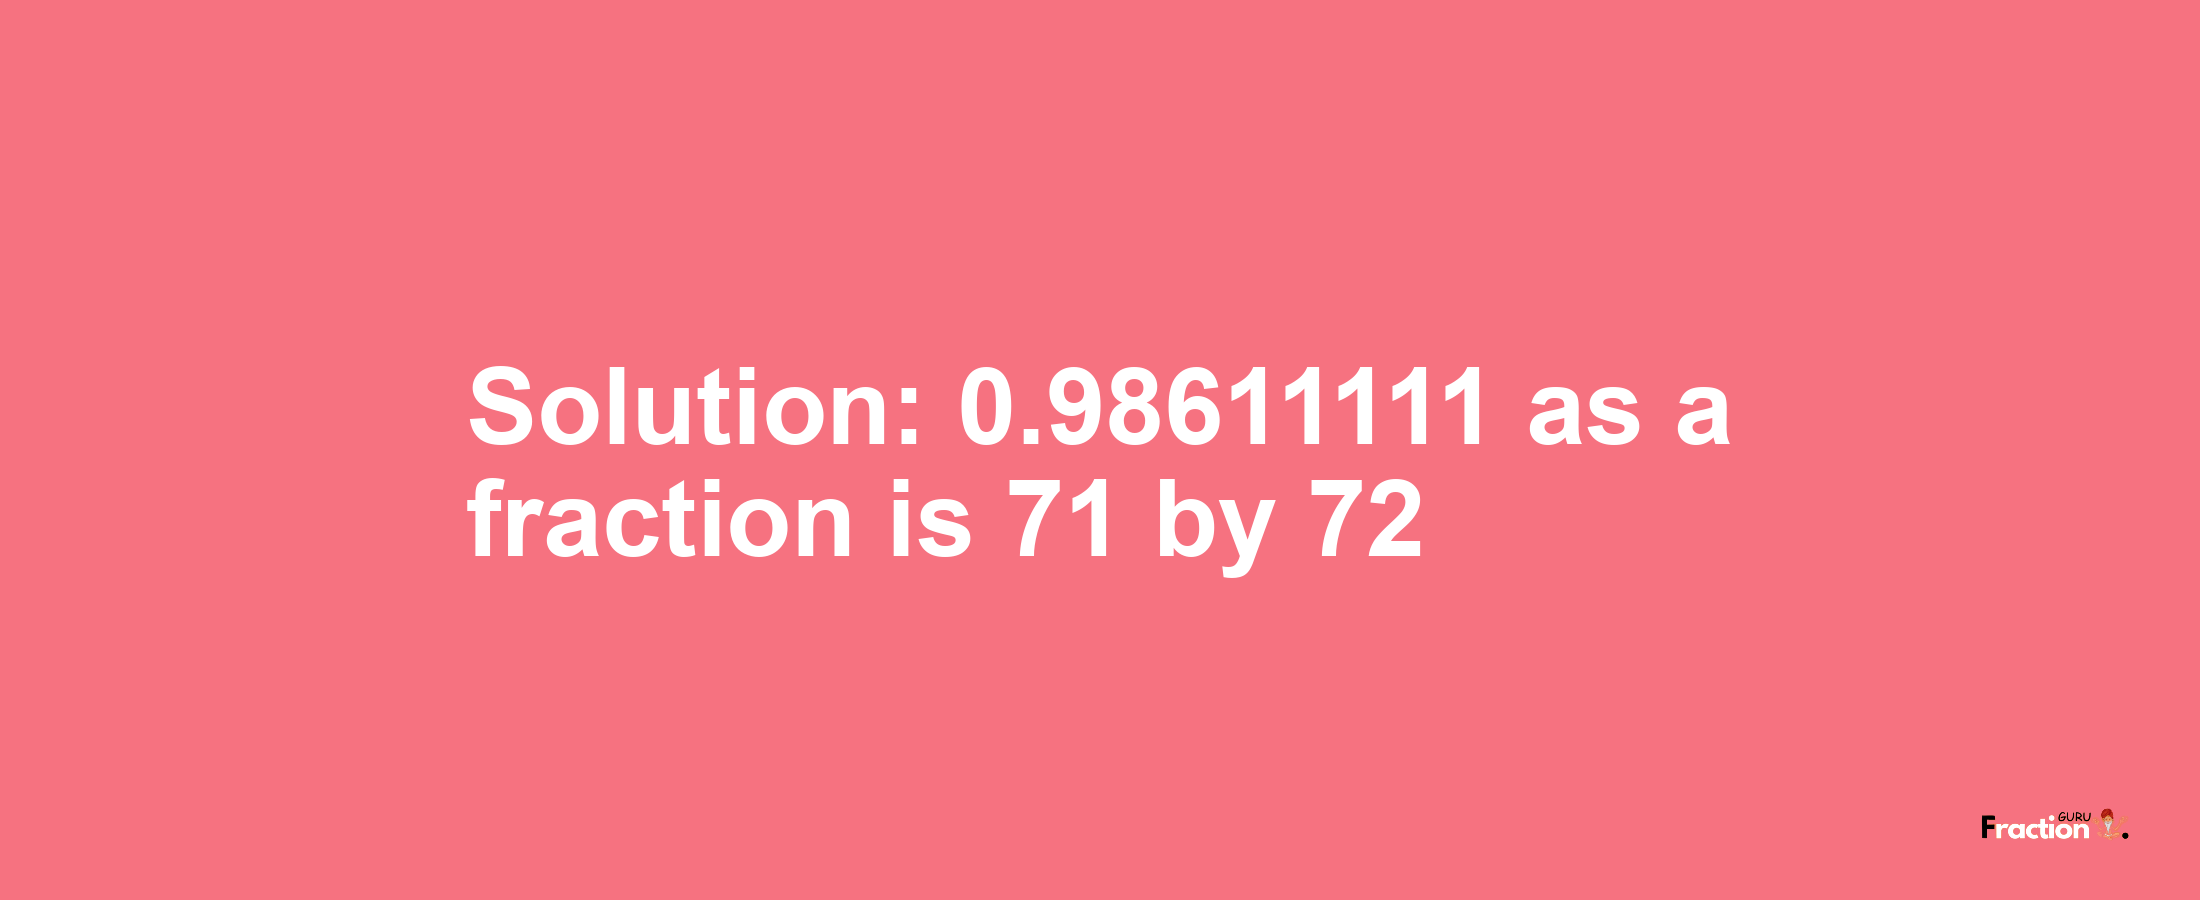 Solution:0.98611111 as a fraction is 71/72